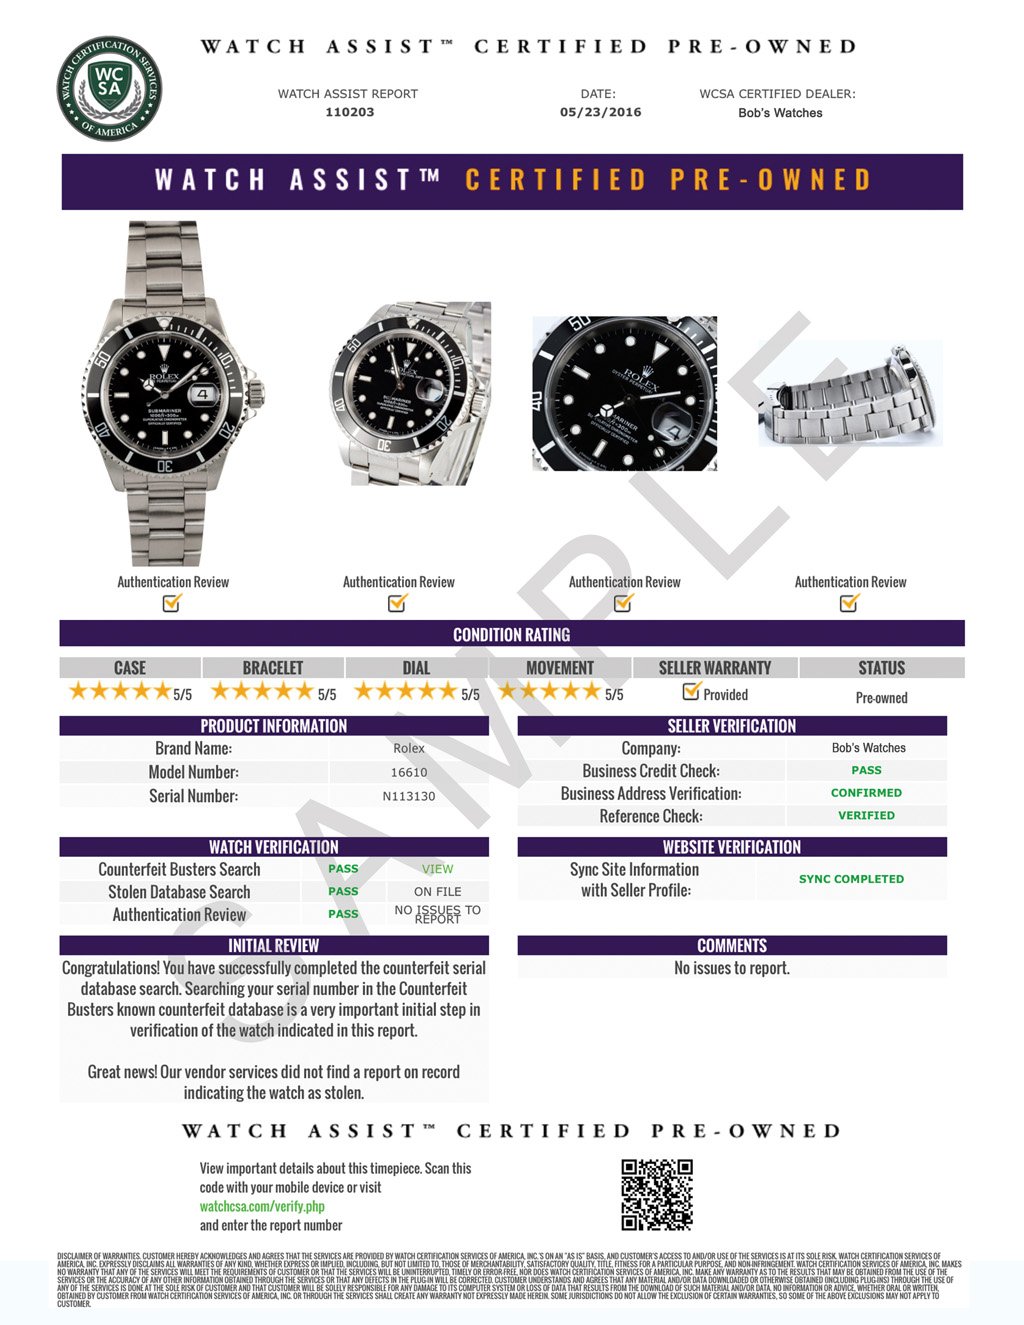 Watch Assist Certified Pre-Owned Certificate Sample Report